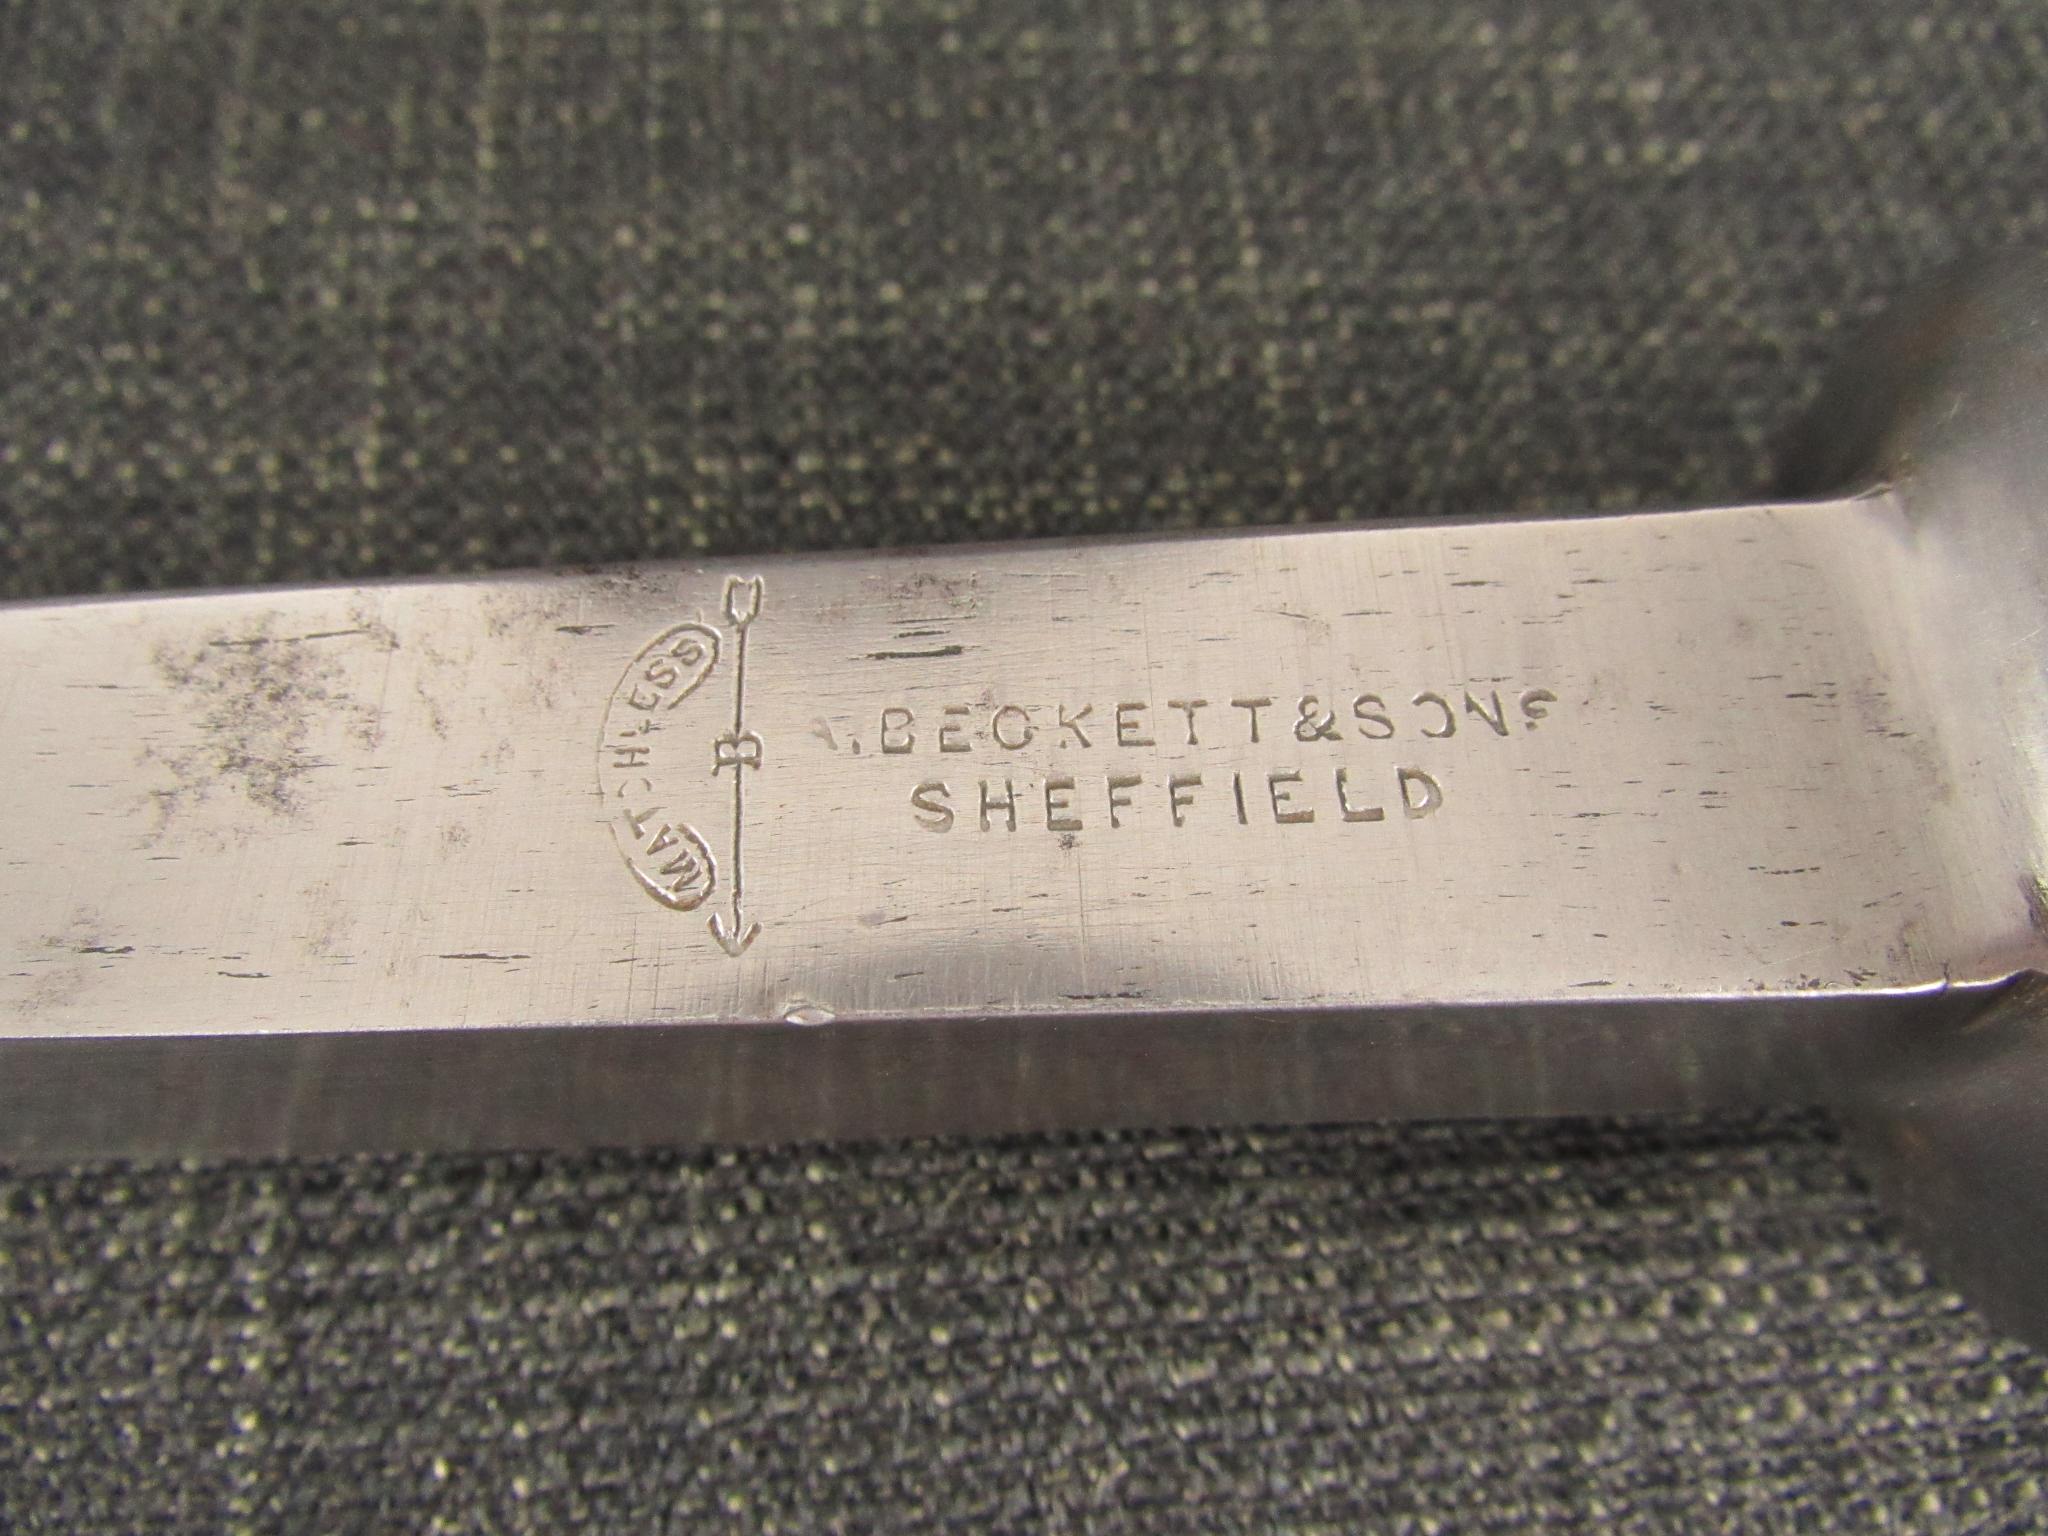 Large Matchless Brand Mortice Chisel by A BECKETT & SONS - 13/16"